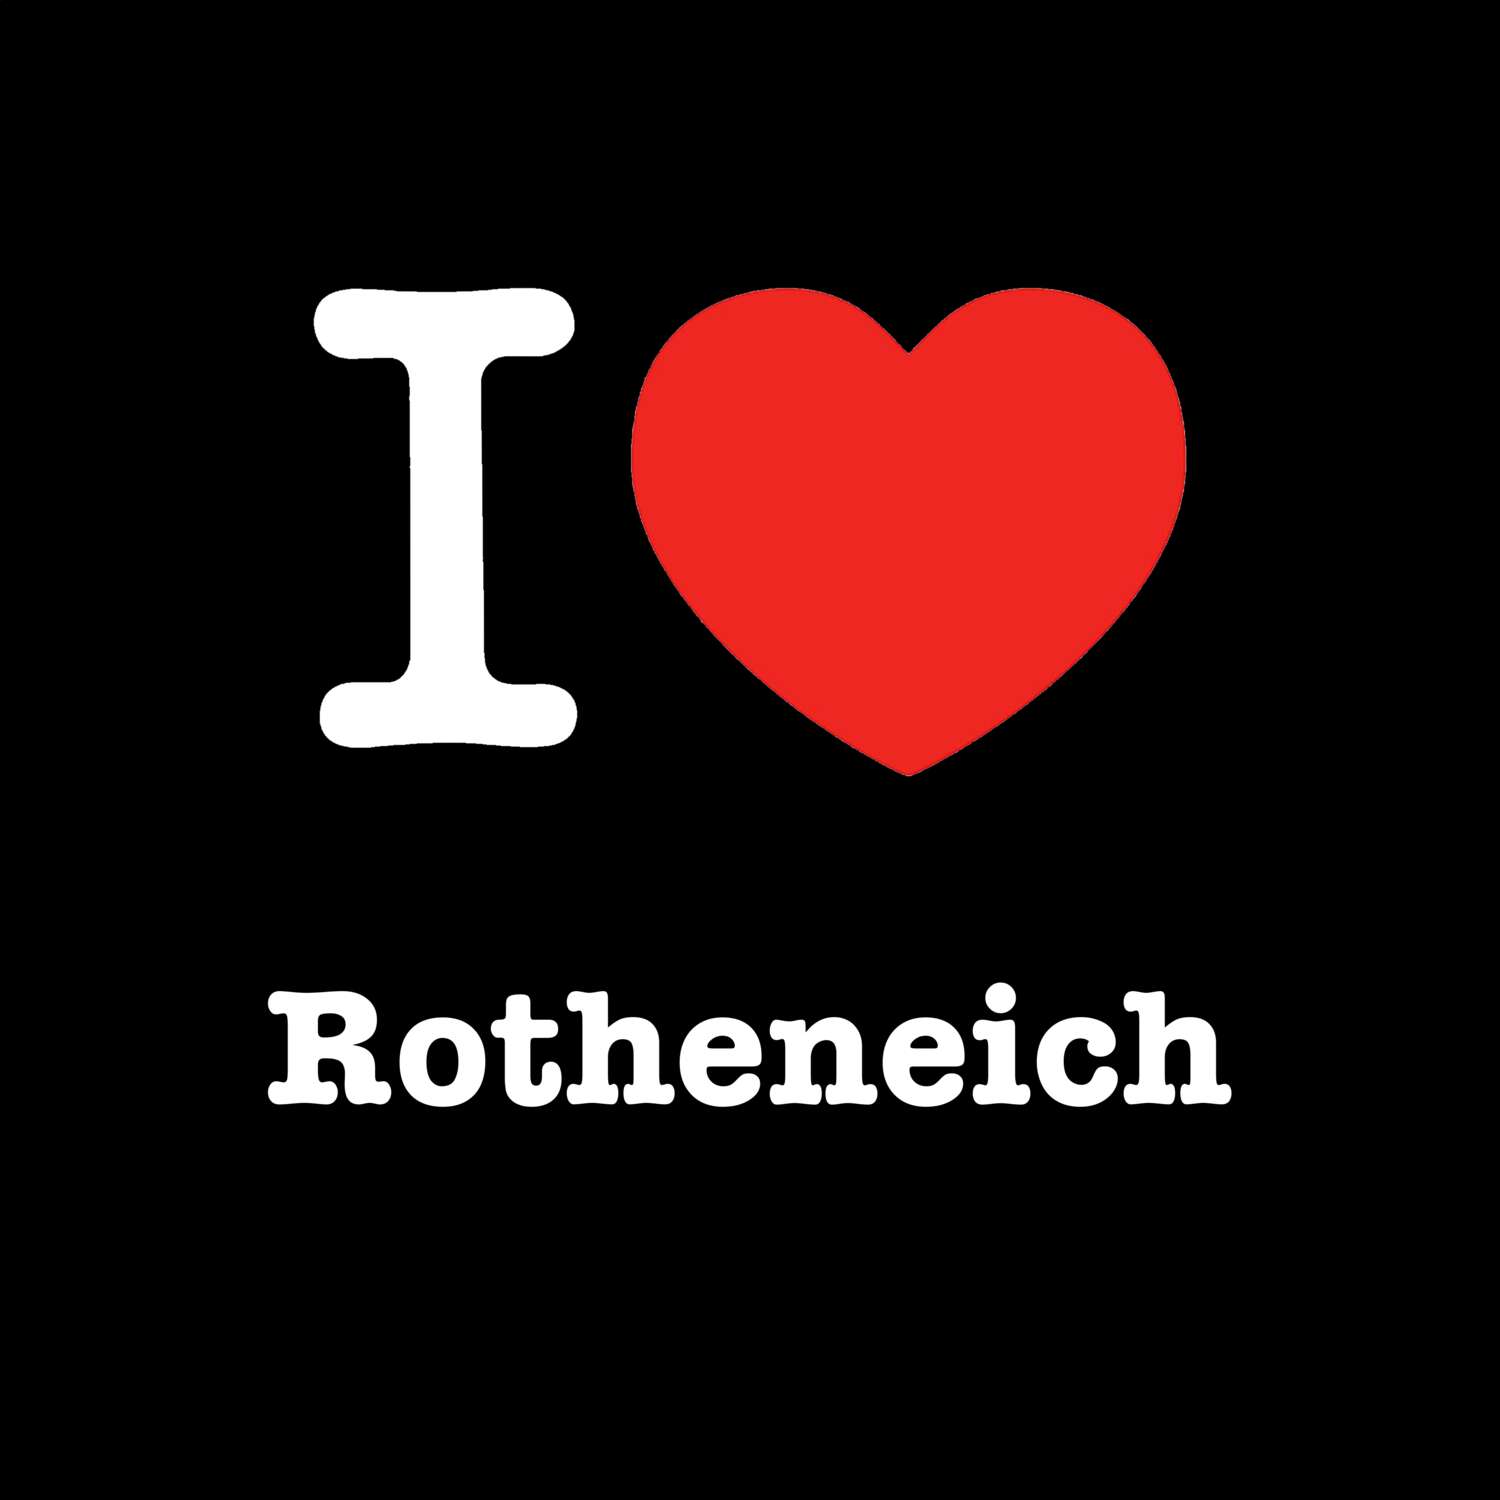 Rotheneich T-Shirt »I love«